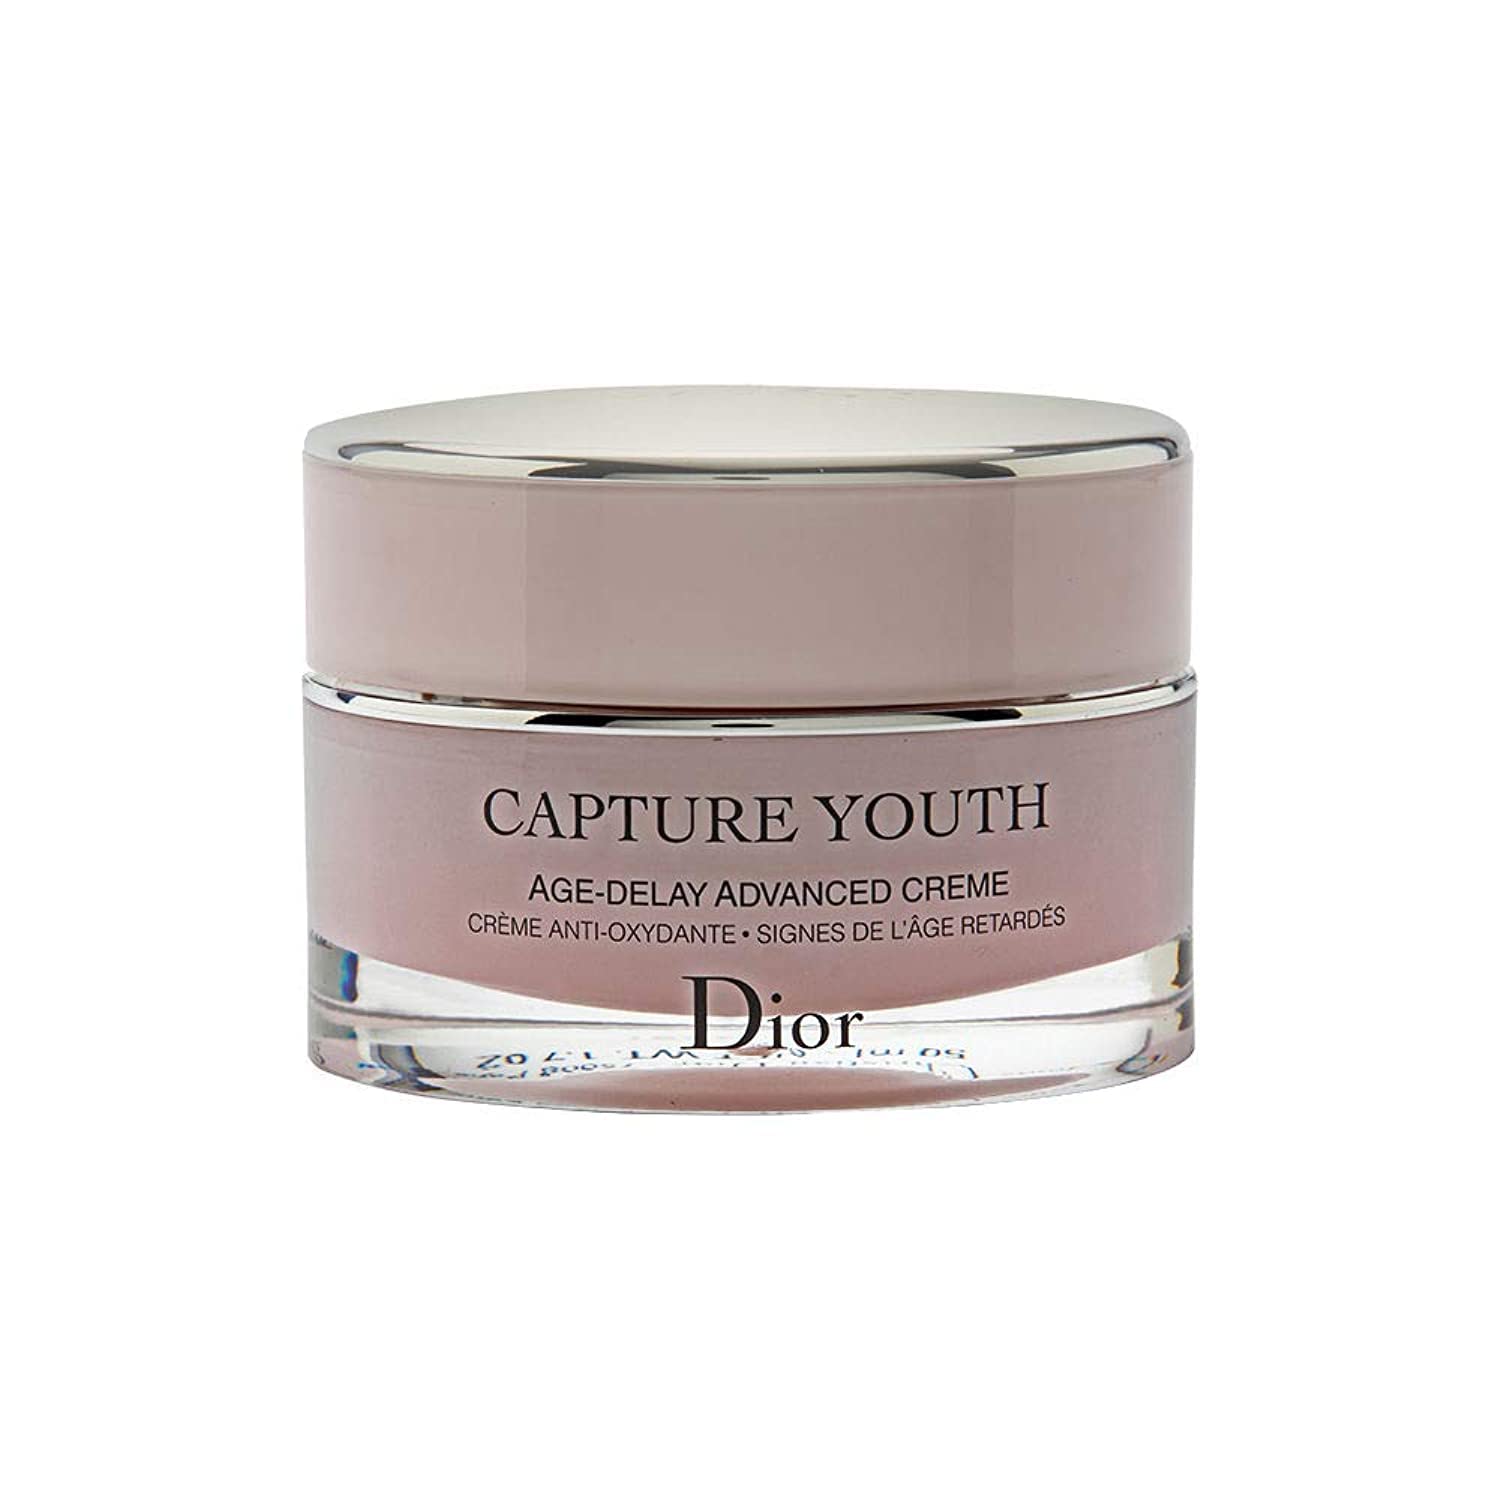 Amazoncom Christian Dior Capture Youth AgeDelay Advanced Cream Women 17  oz  Beauty  Personal Care